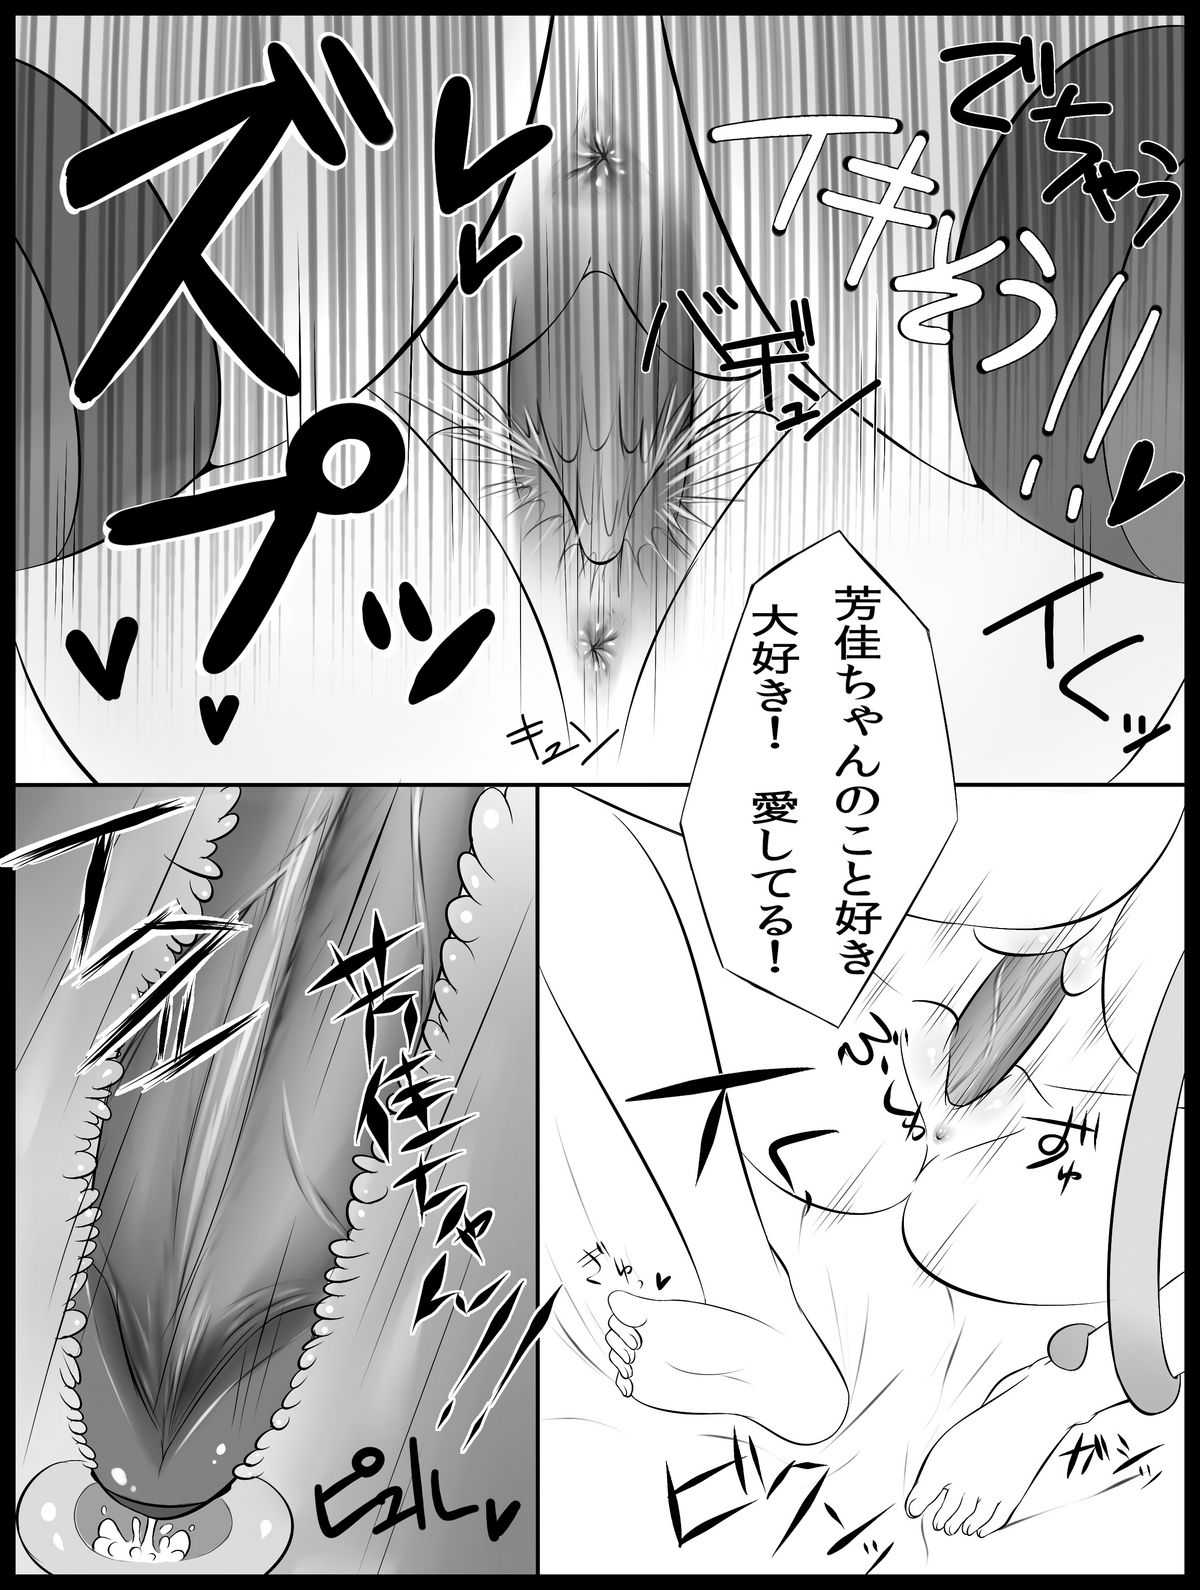 [94Plum] Doujin 1 (Strike Witches) 